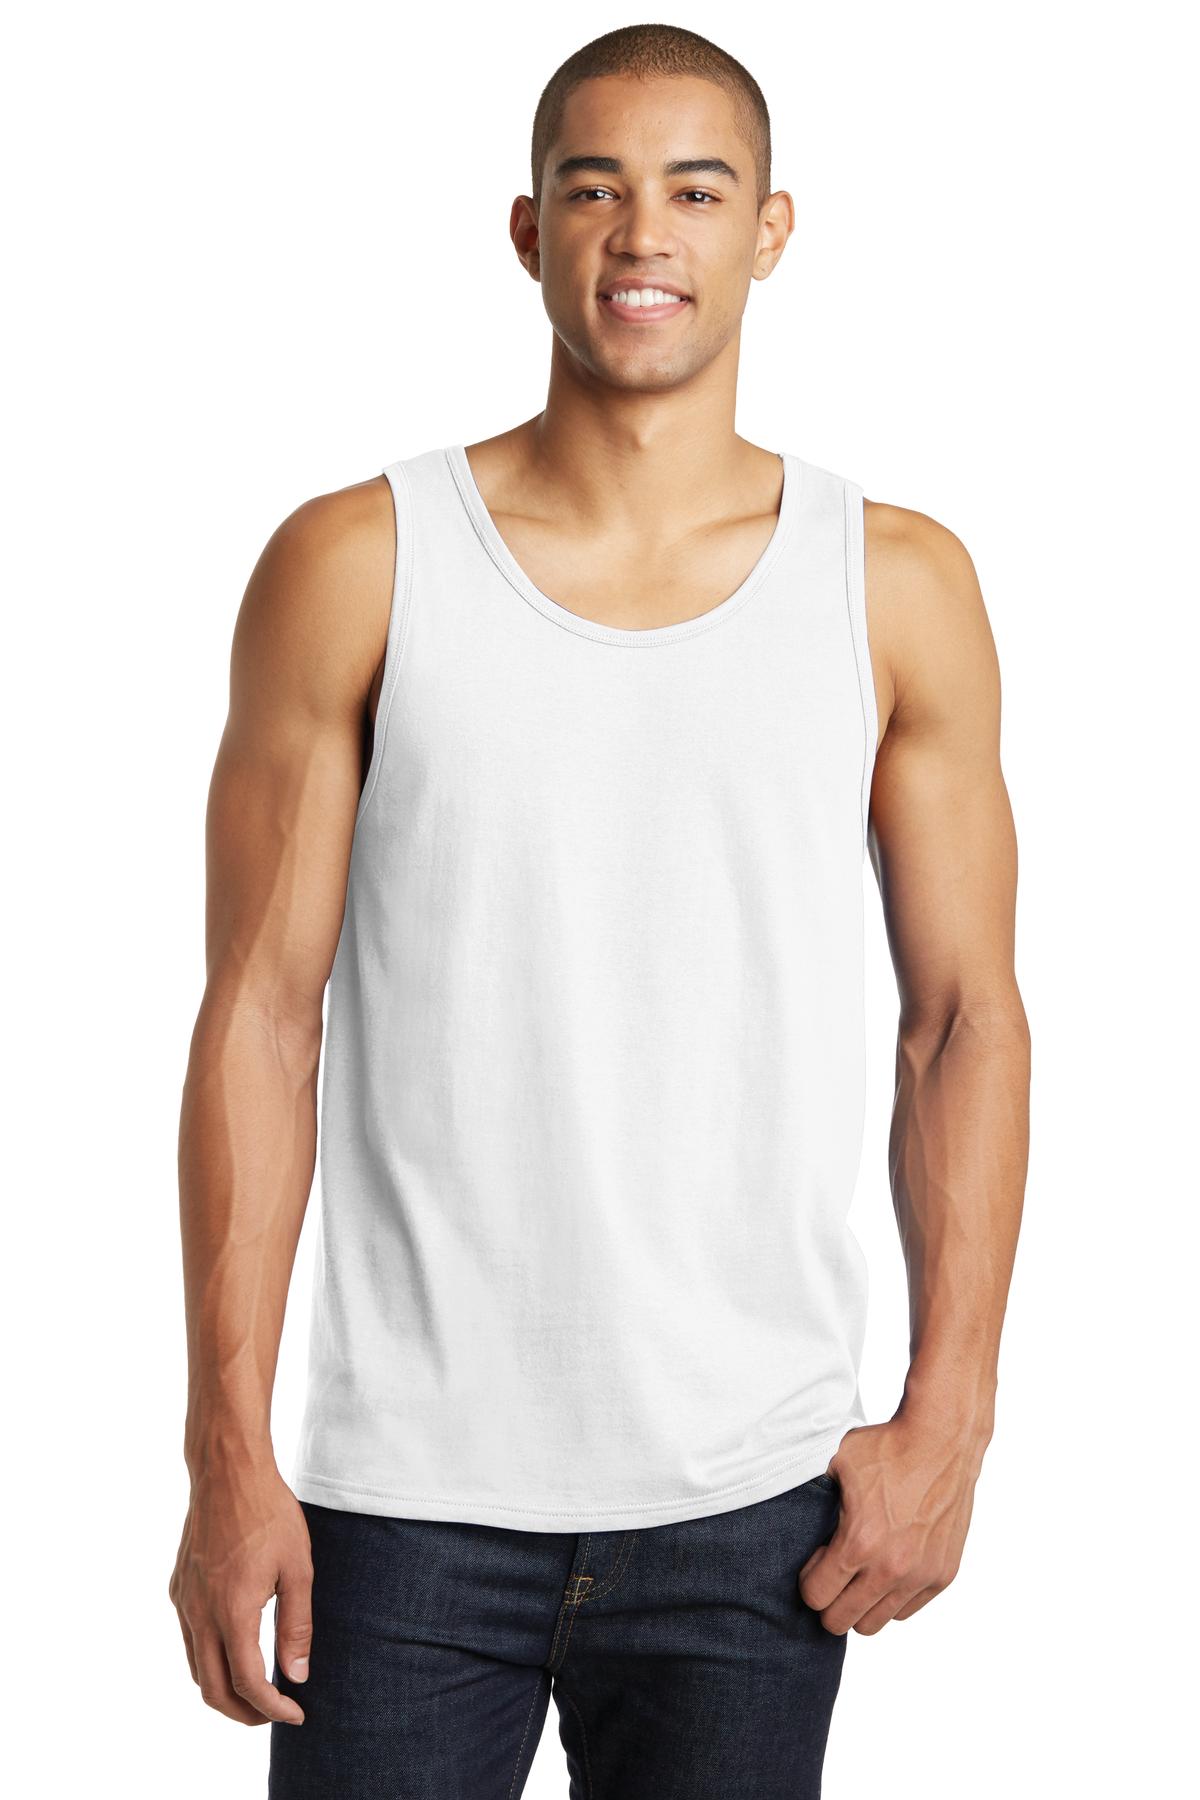 District Hospitality T-Shirts ® The Concert Tank®.-District